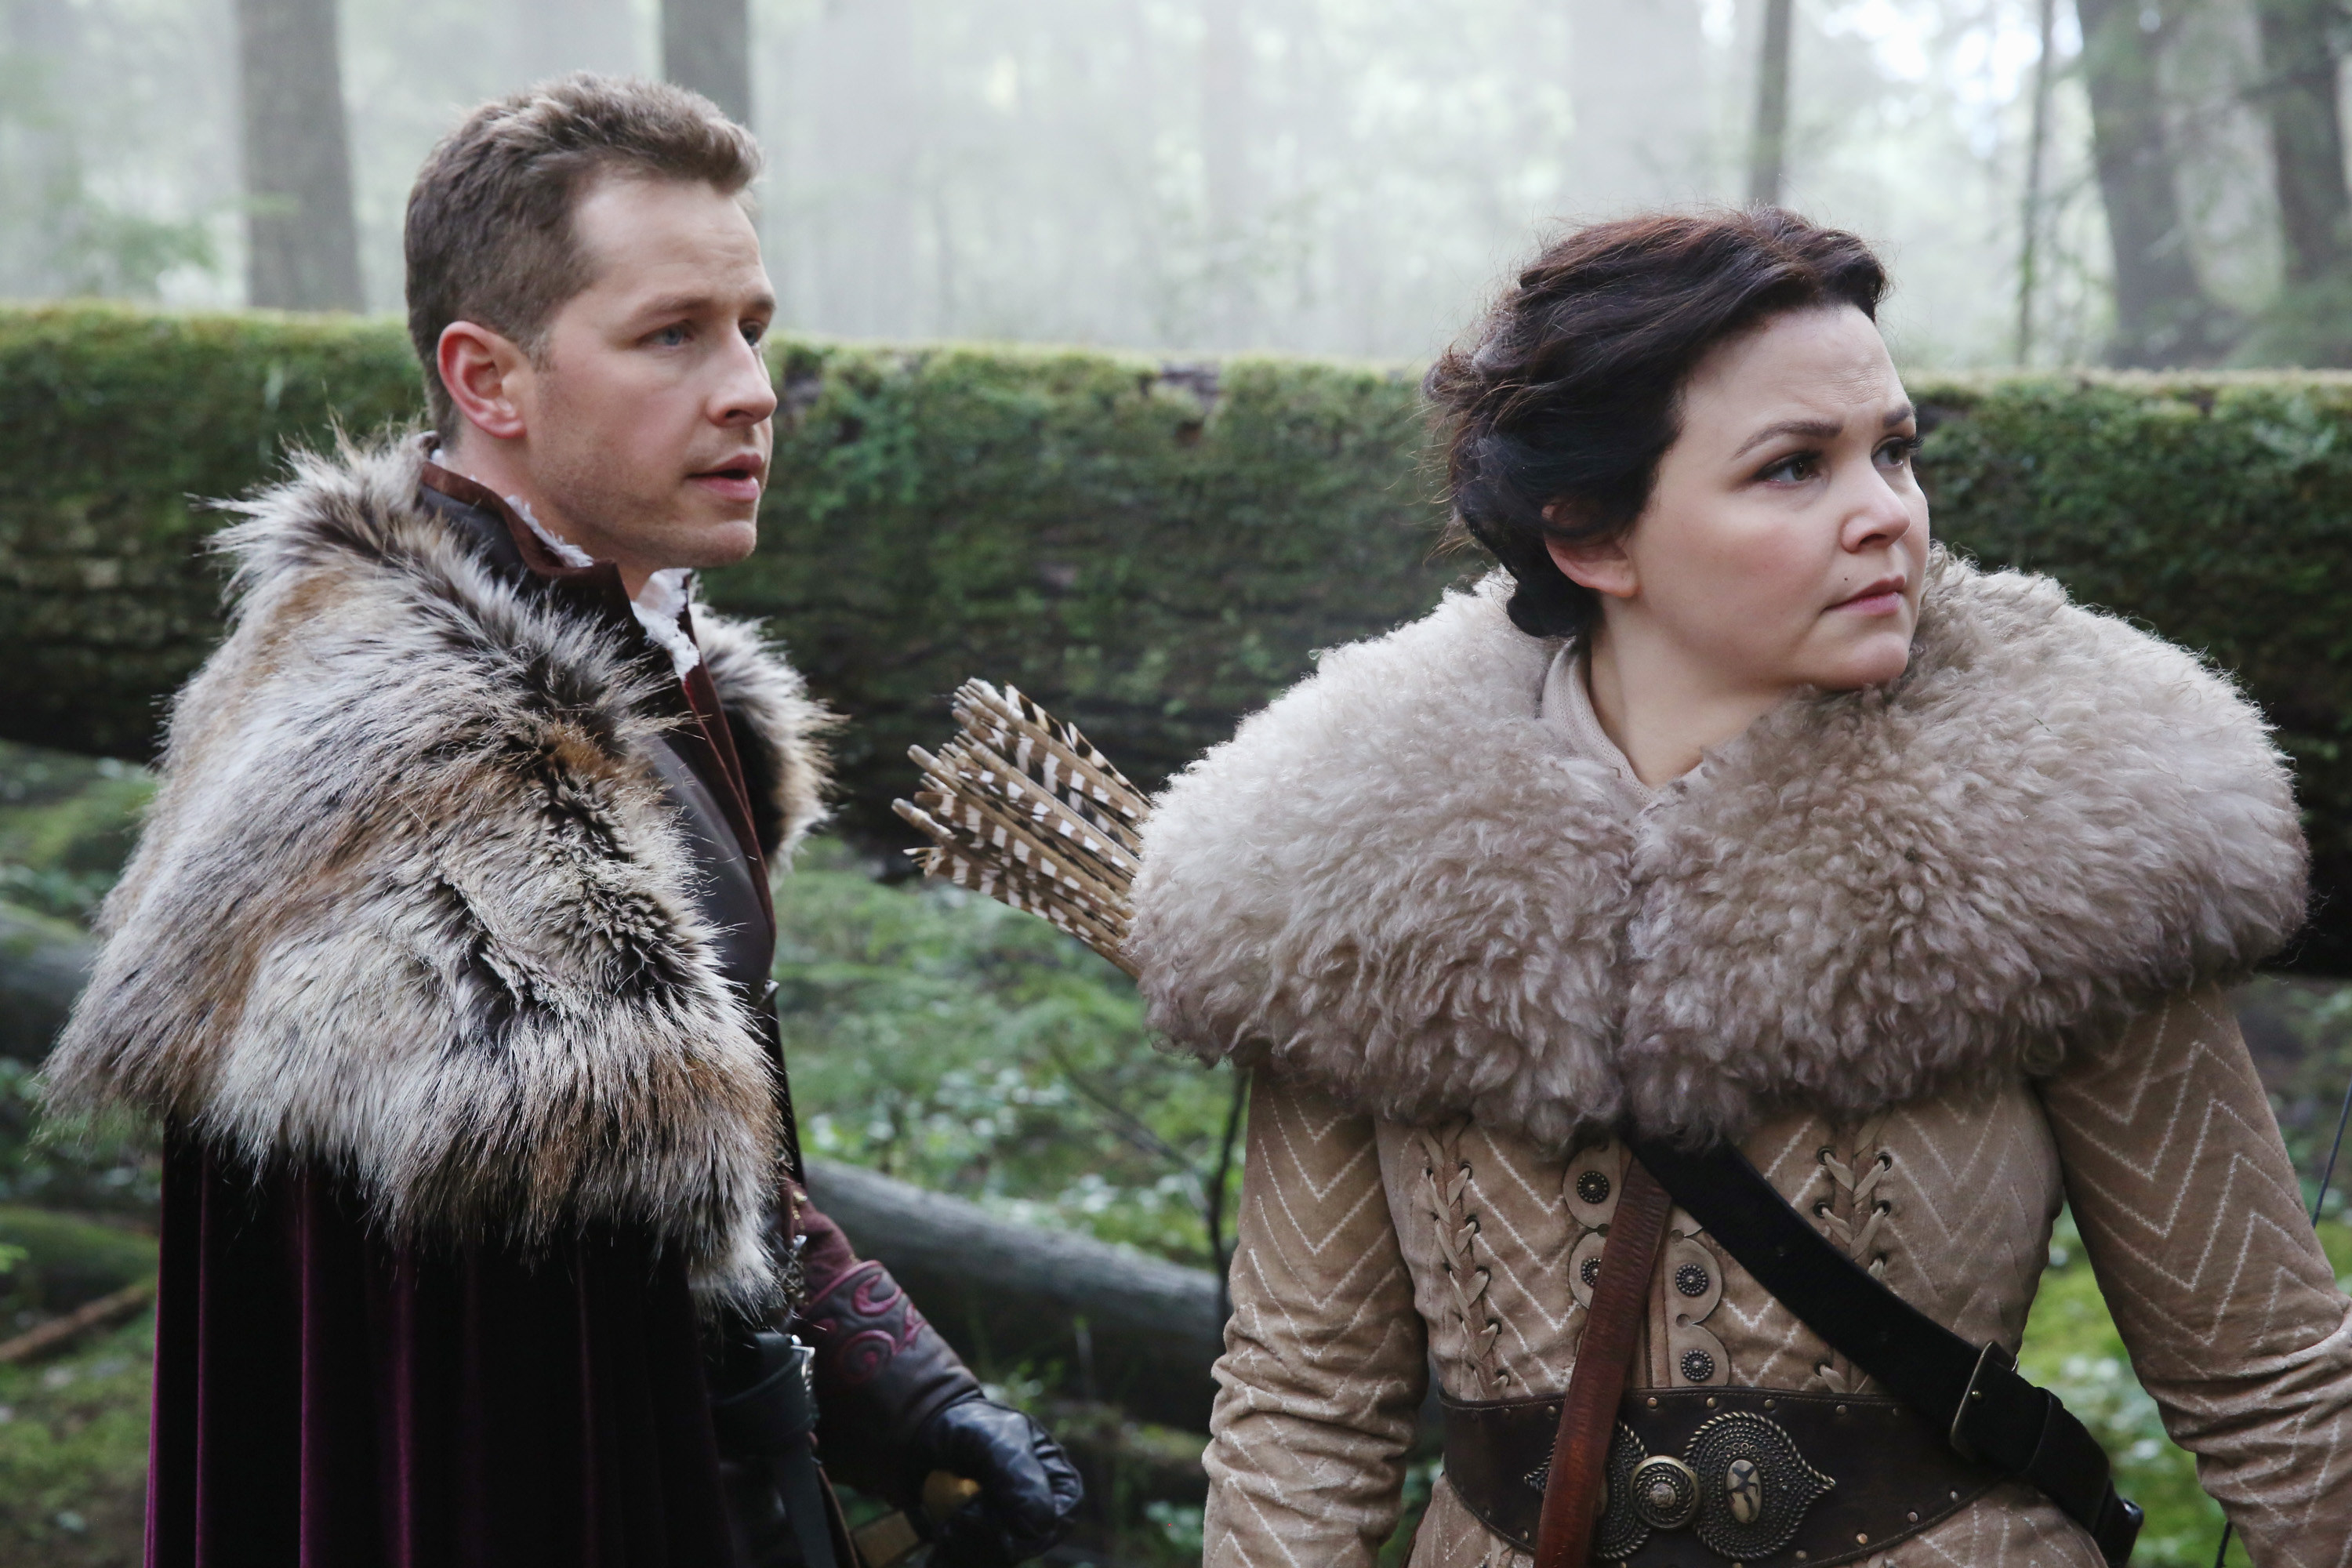 Prince Charming and Snow White wearing furs